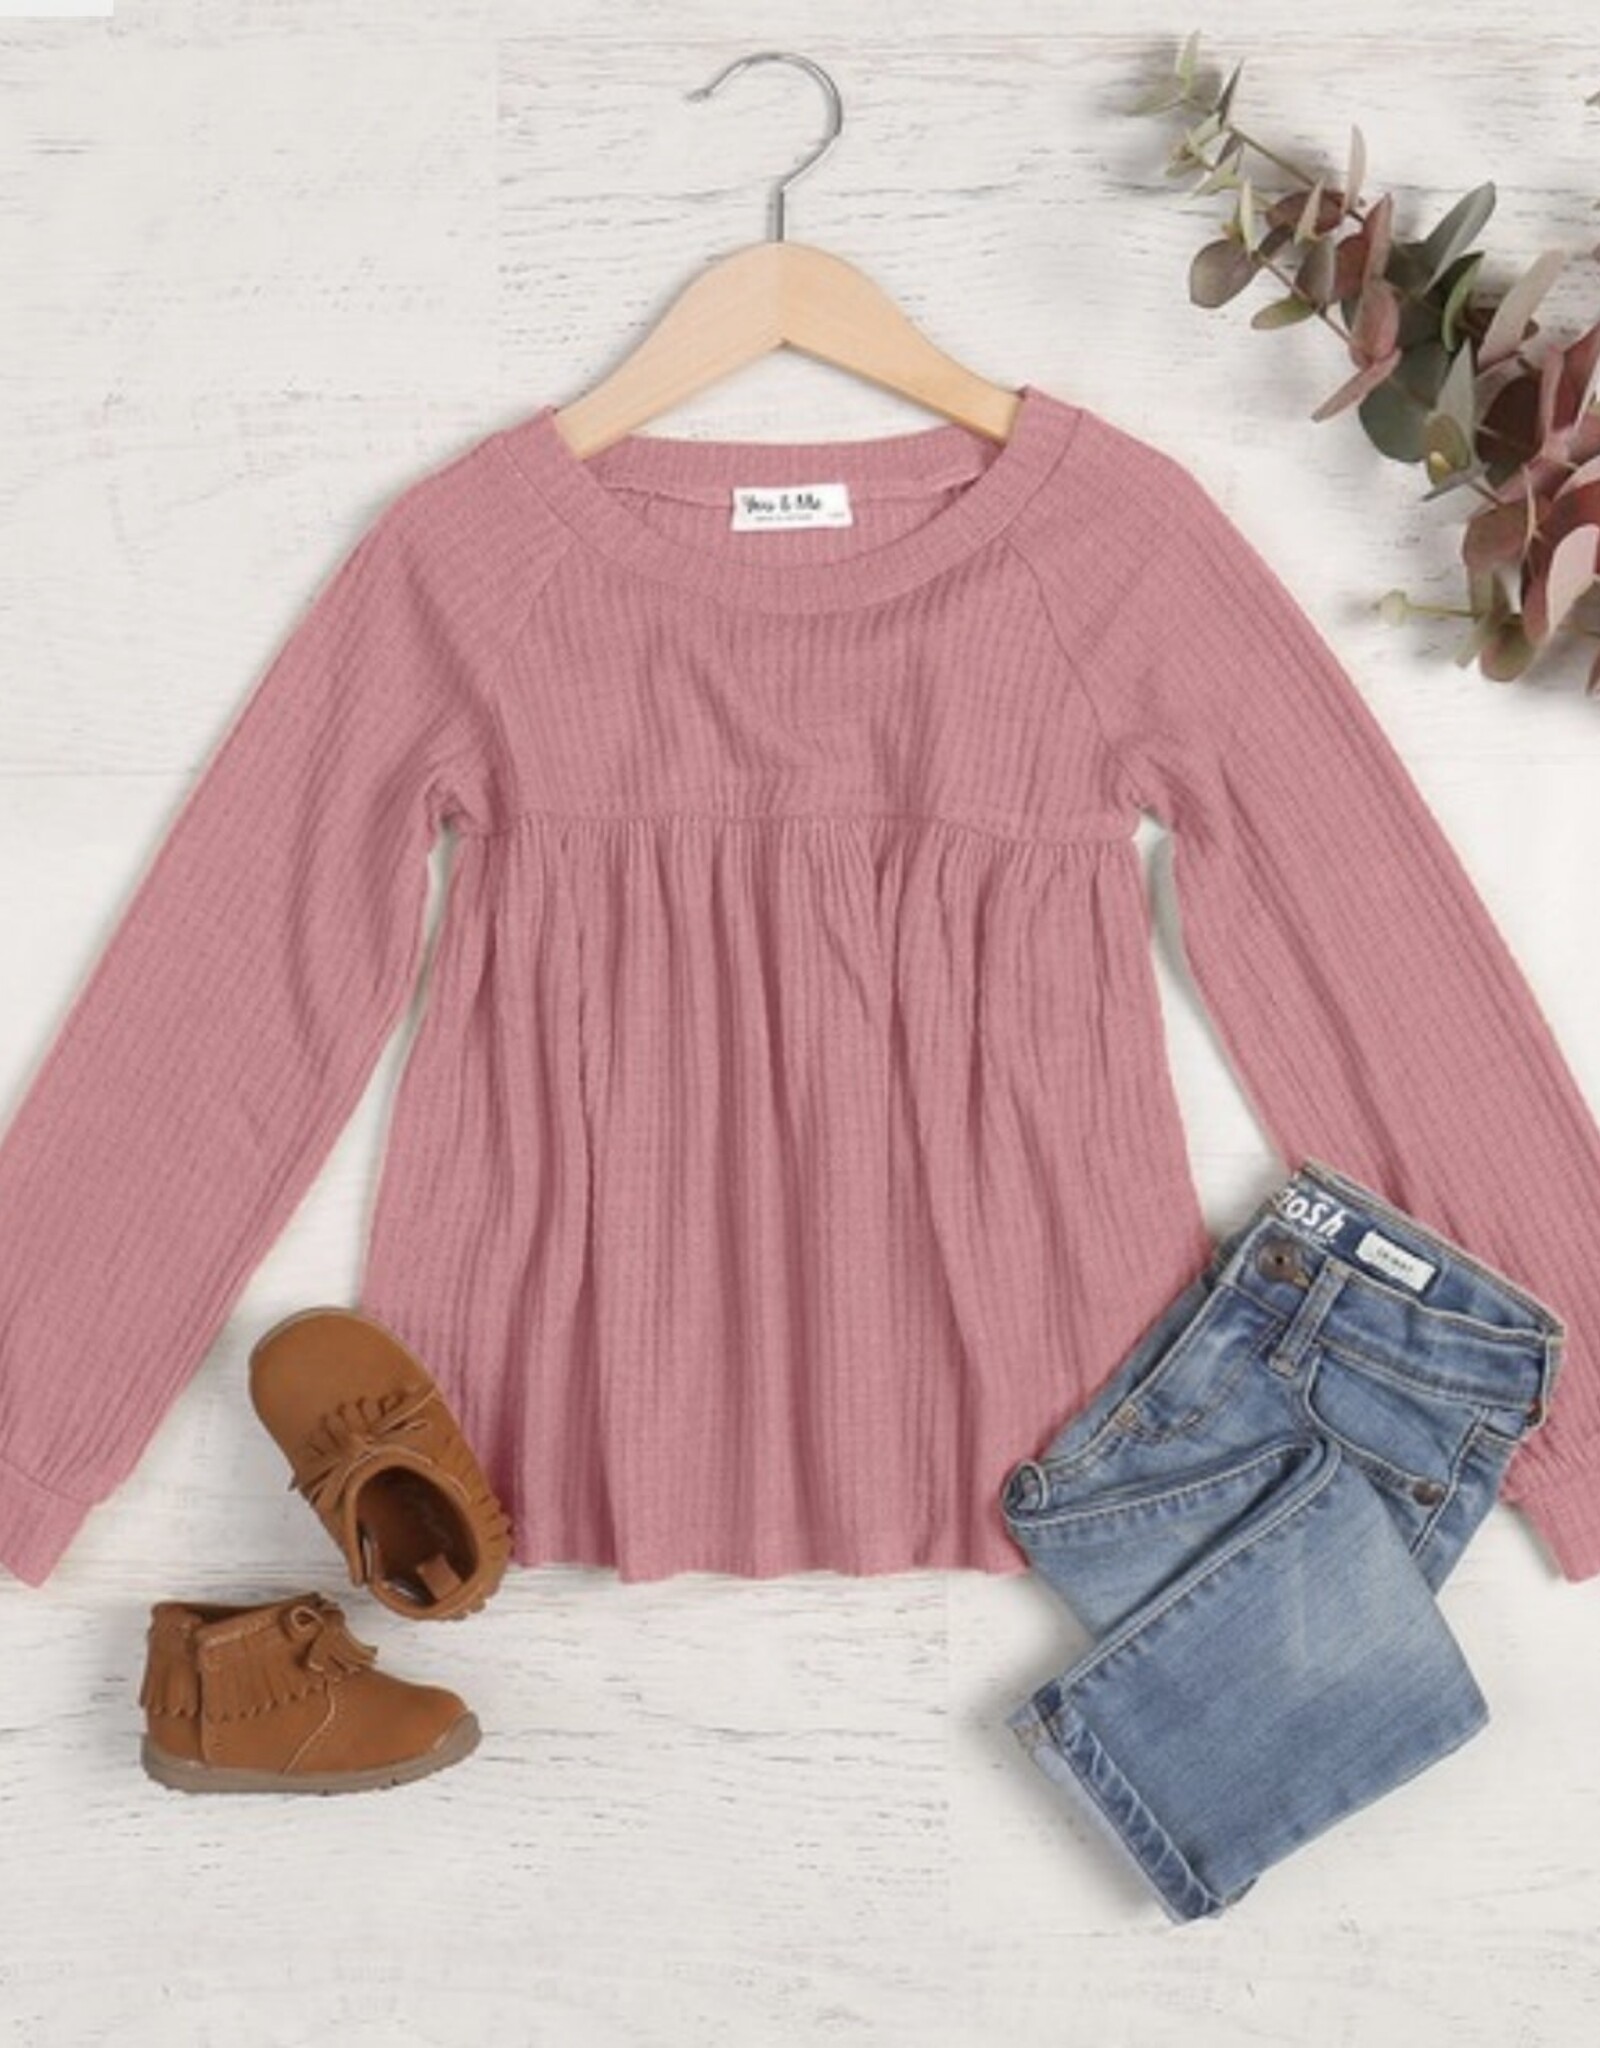 Paisley Waffle Knit Top in Mauve